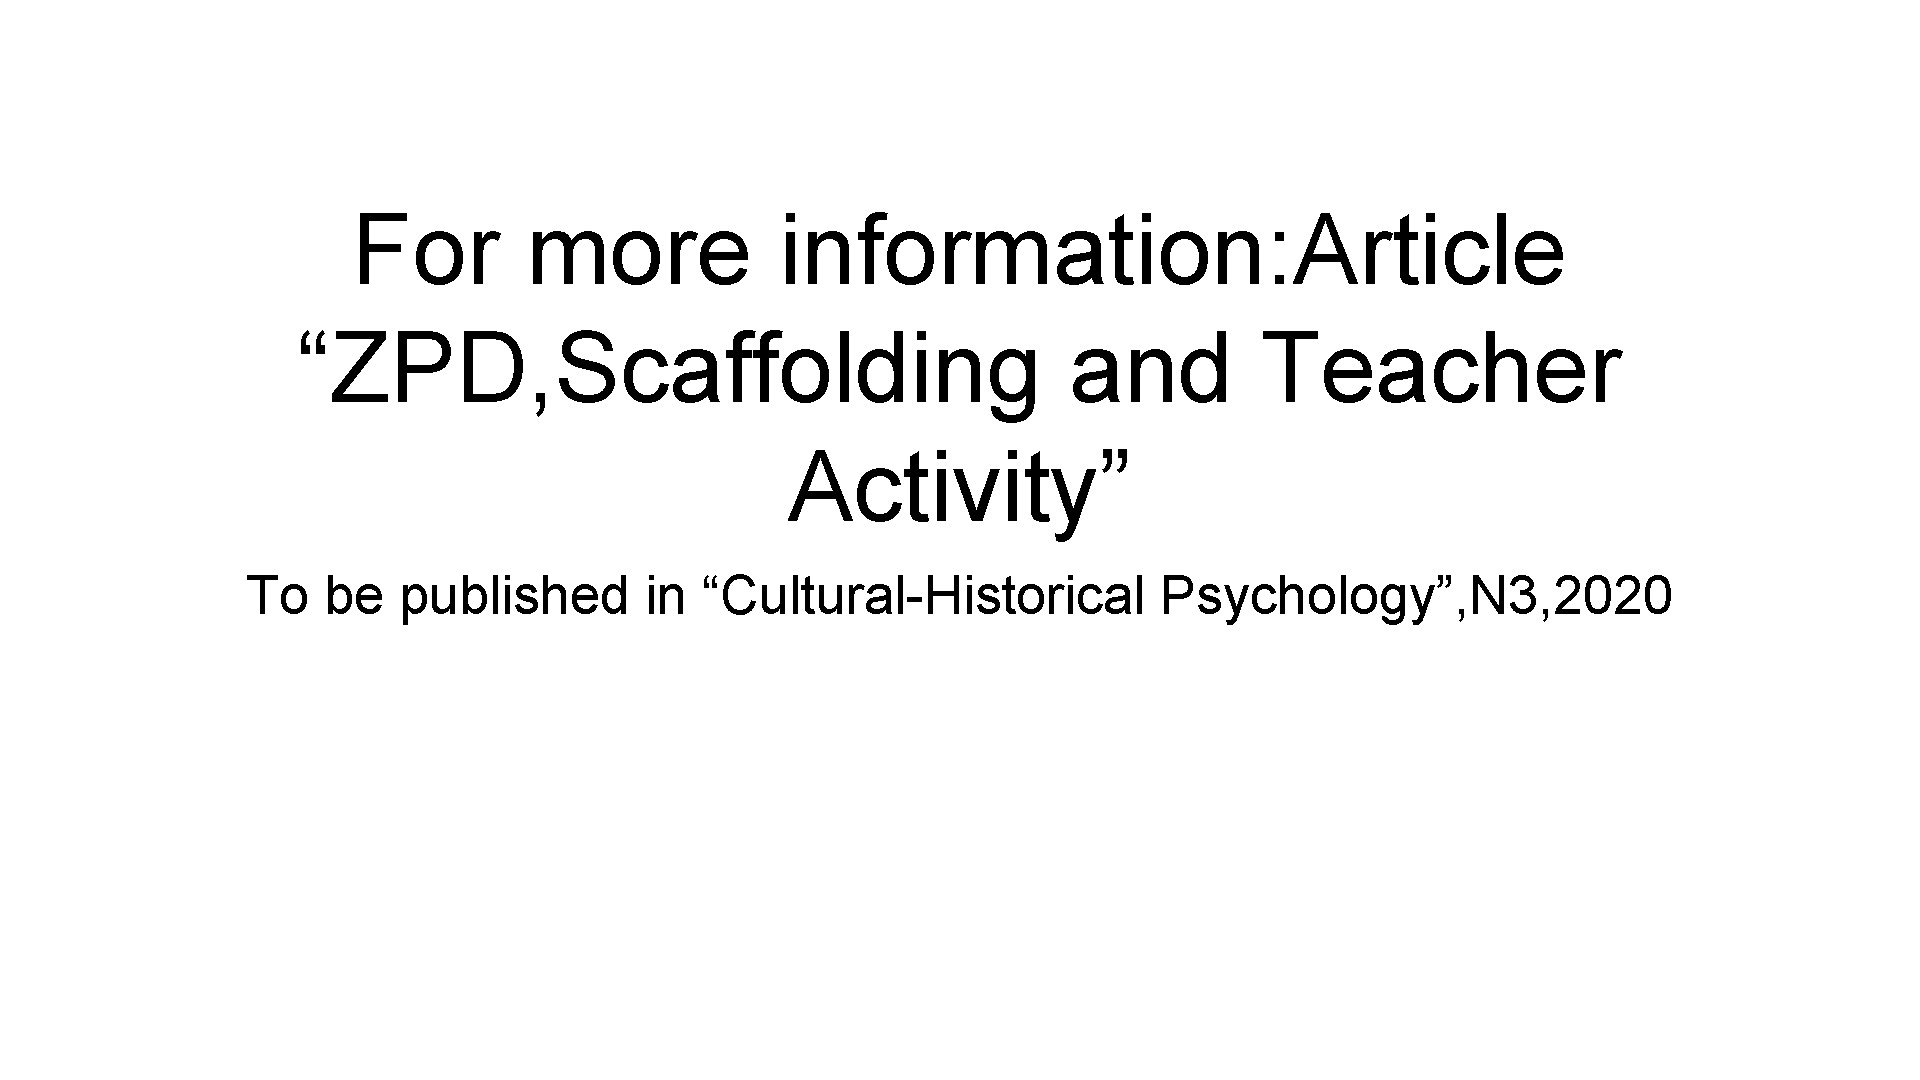 For more information: Article “ZPD, Scaffolding and Teacher Activity” To be published in “Cultural-Historical